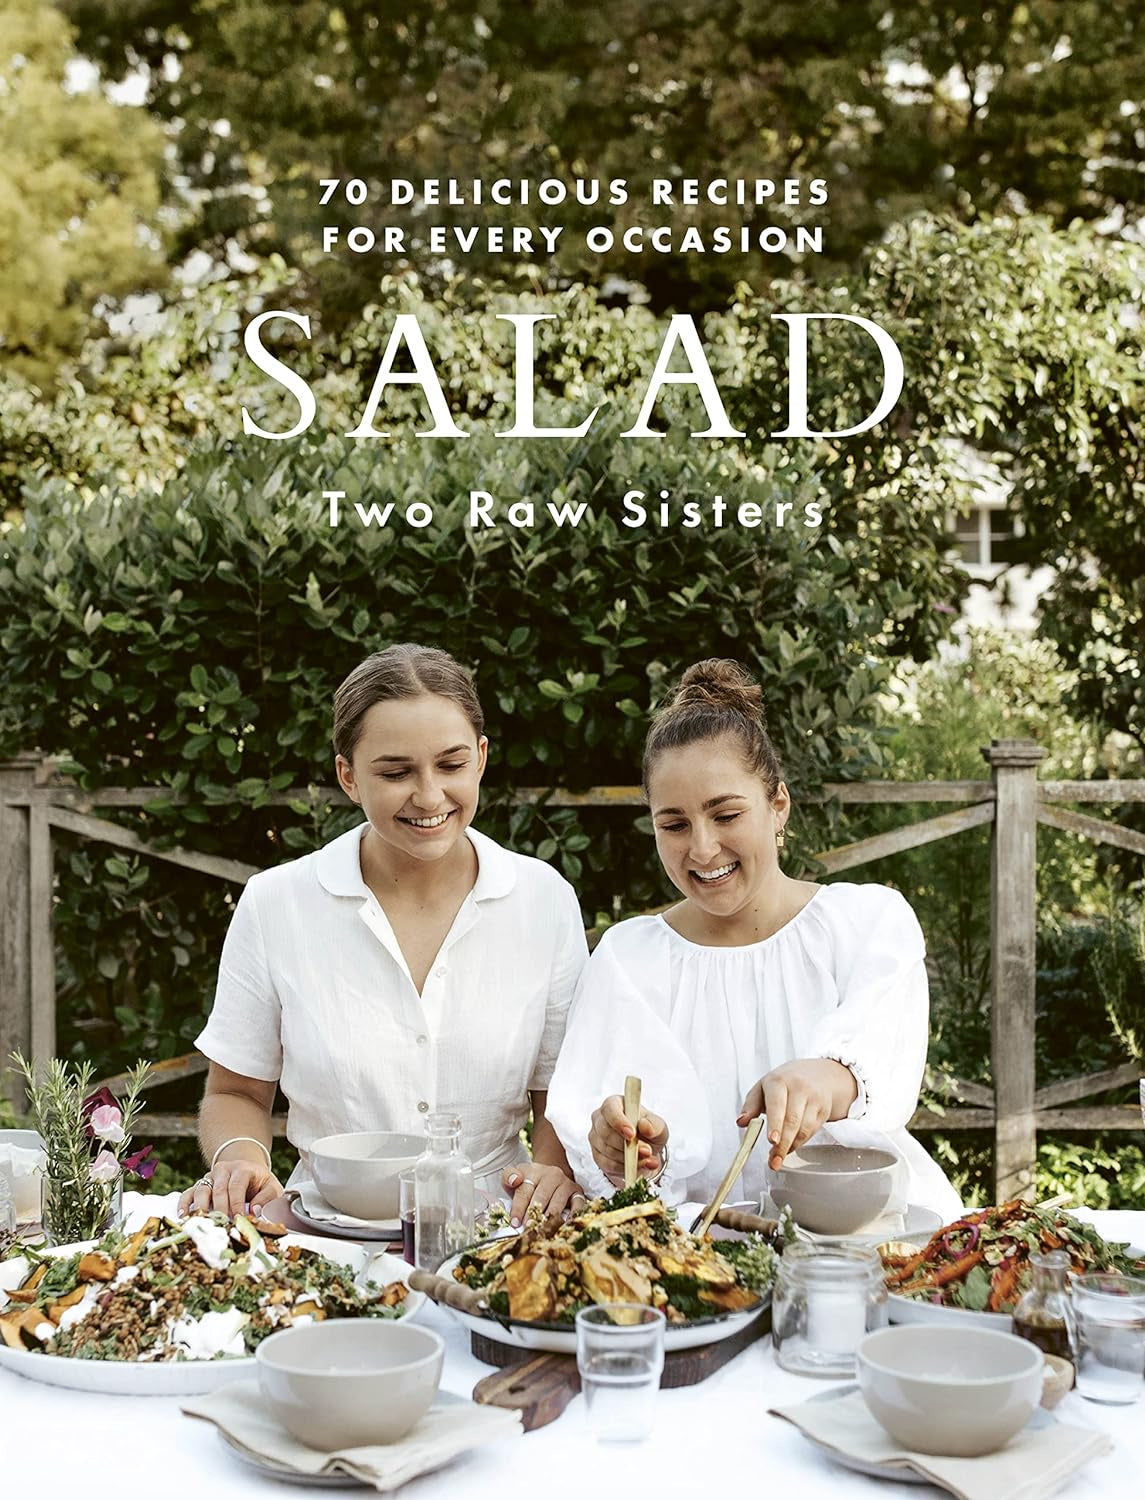 Salad (Two Raw Sisters)